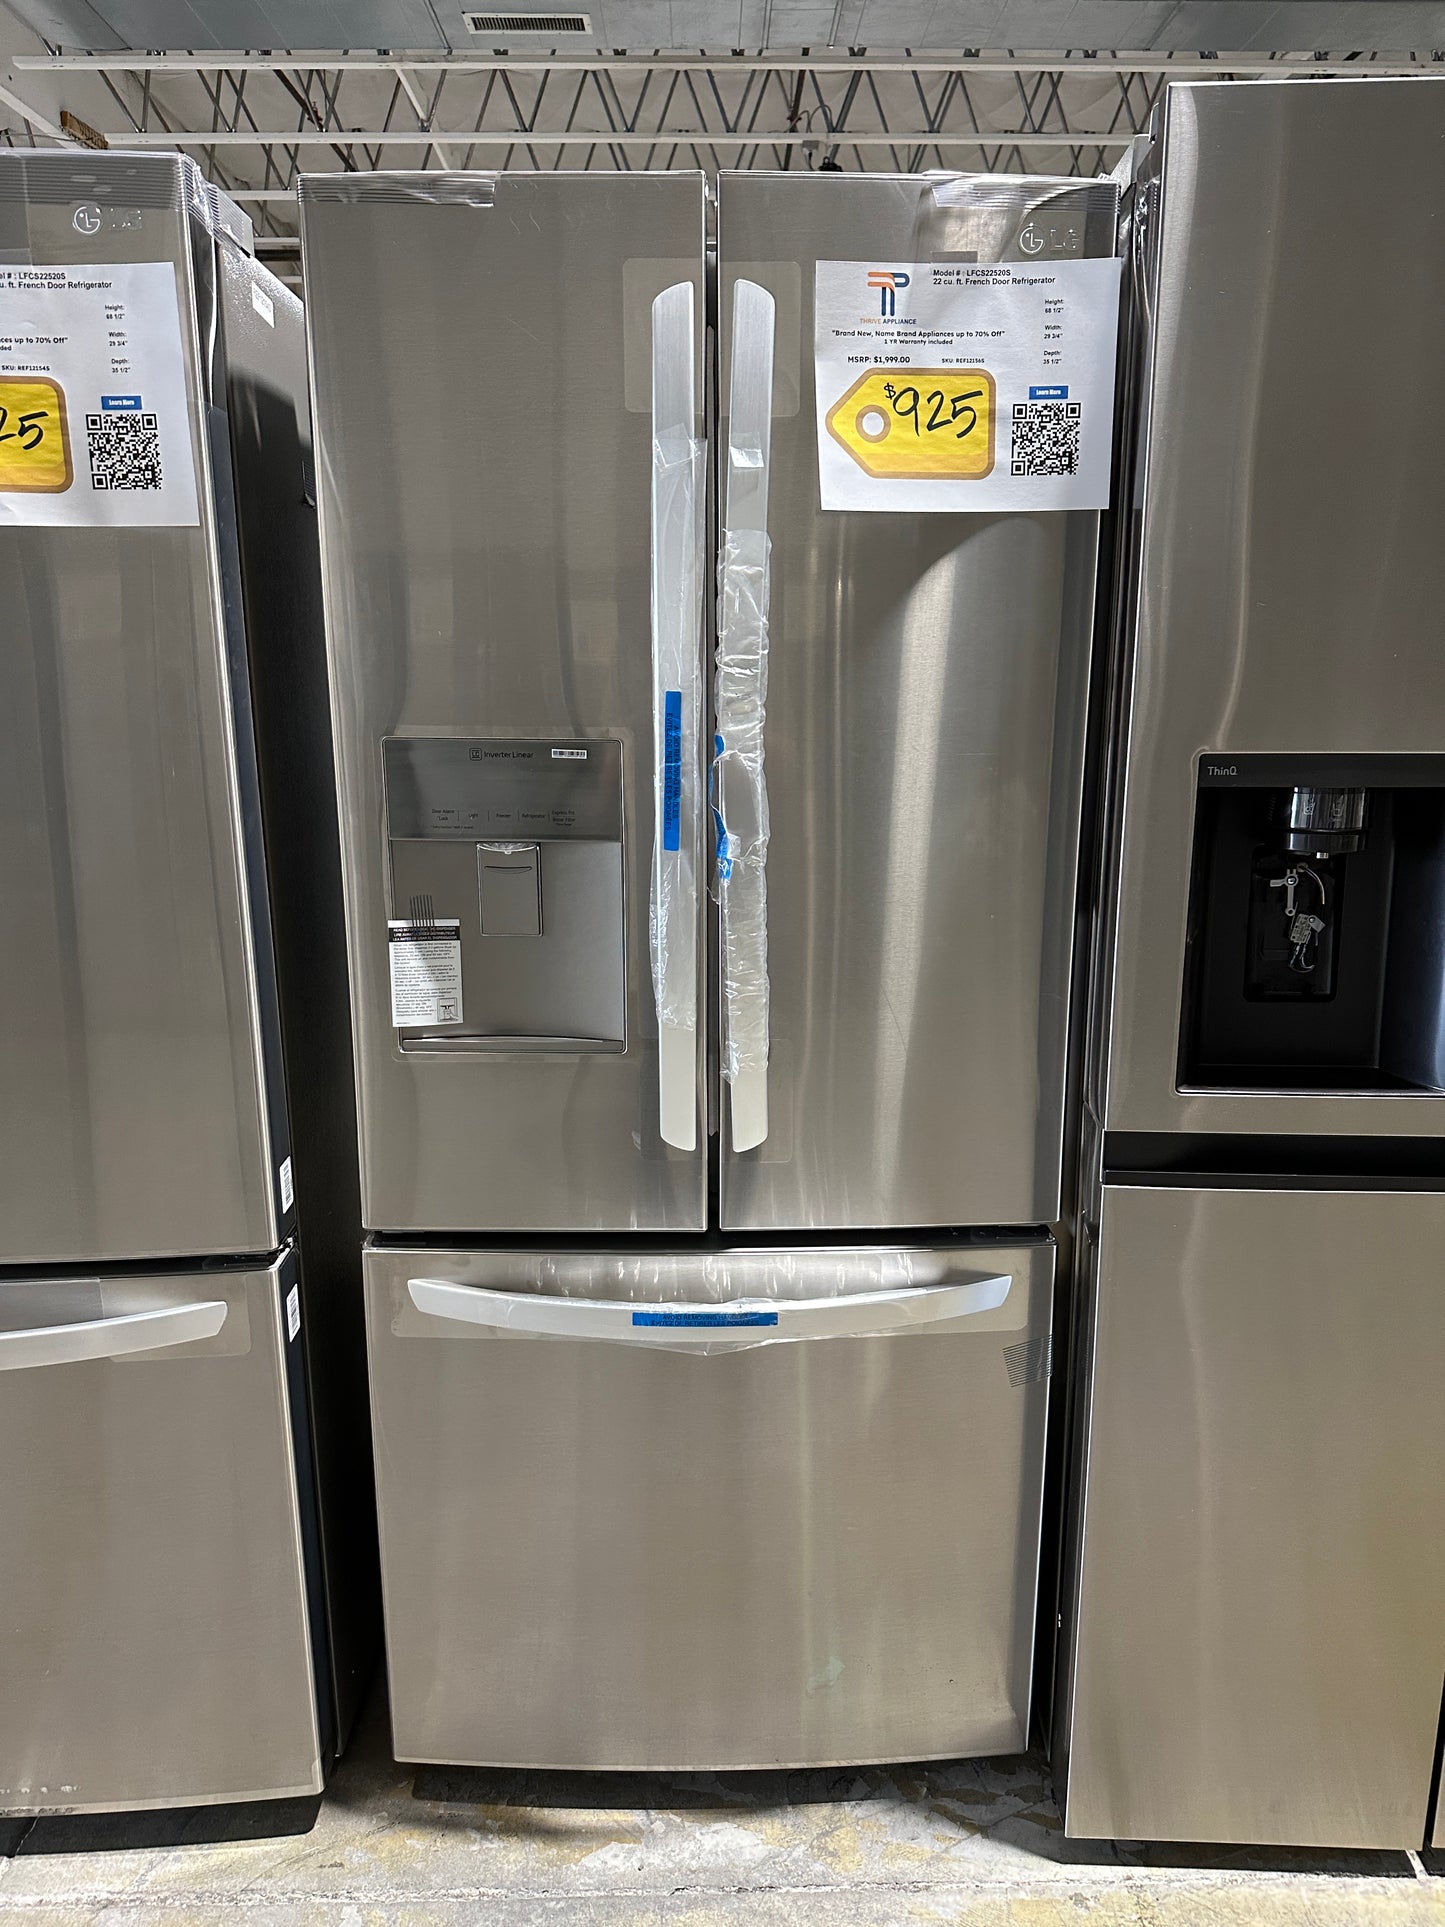 LG - 21.8 Cu. Ft. French Door Refrigerator with Smart Cooling System - Model:LFCS22520S  REF12156S